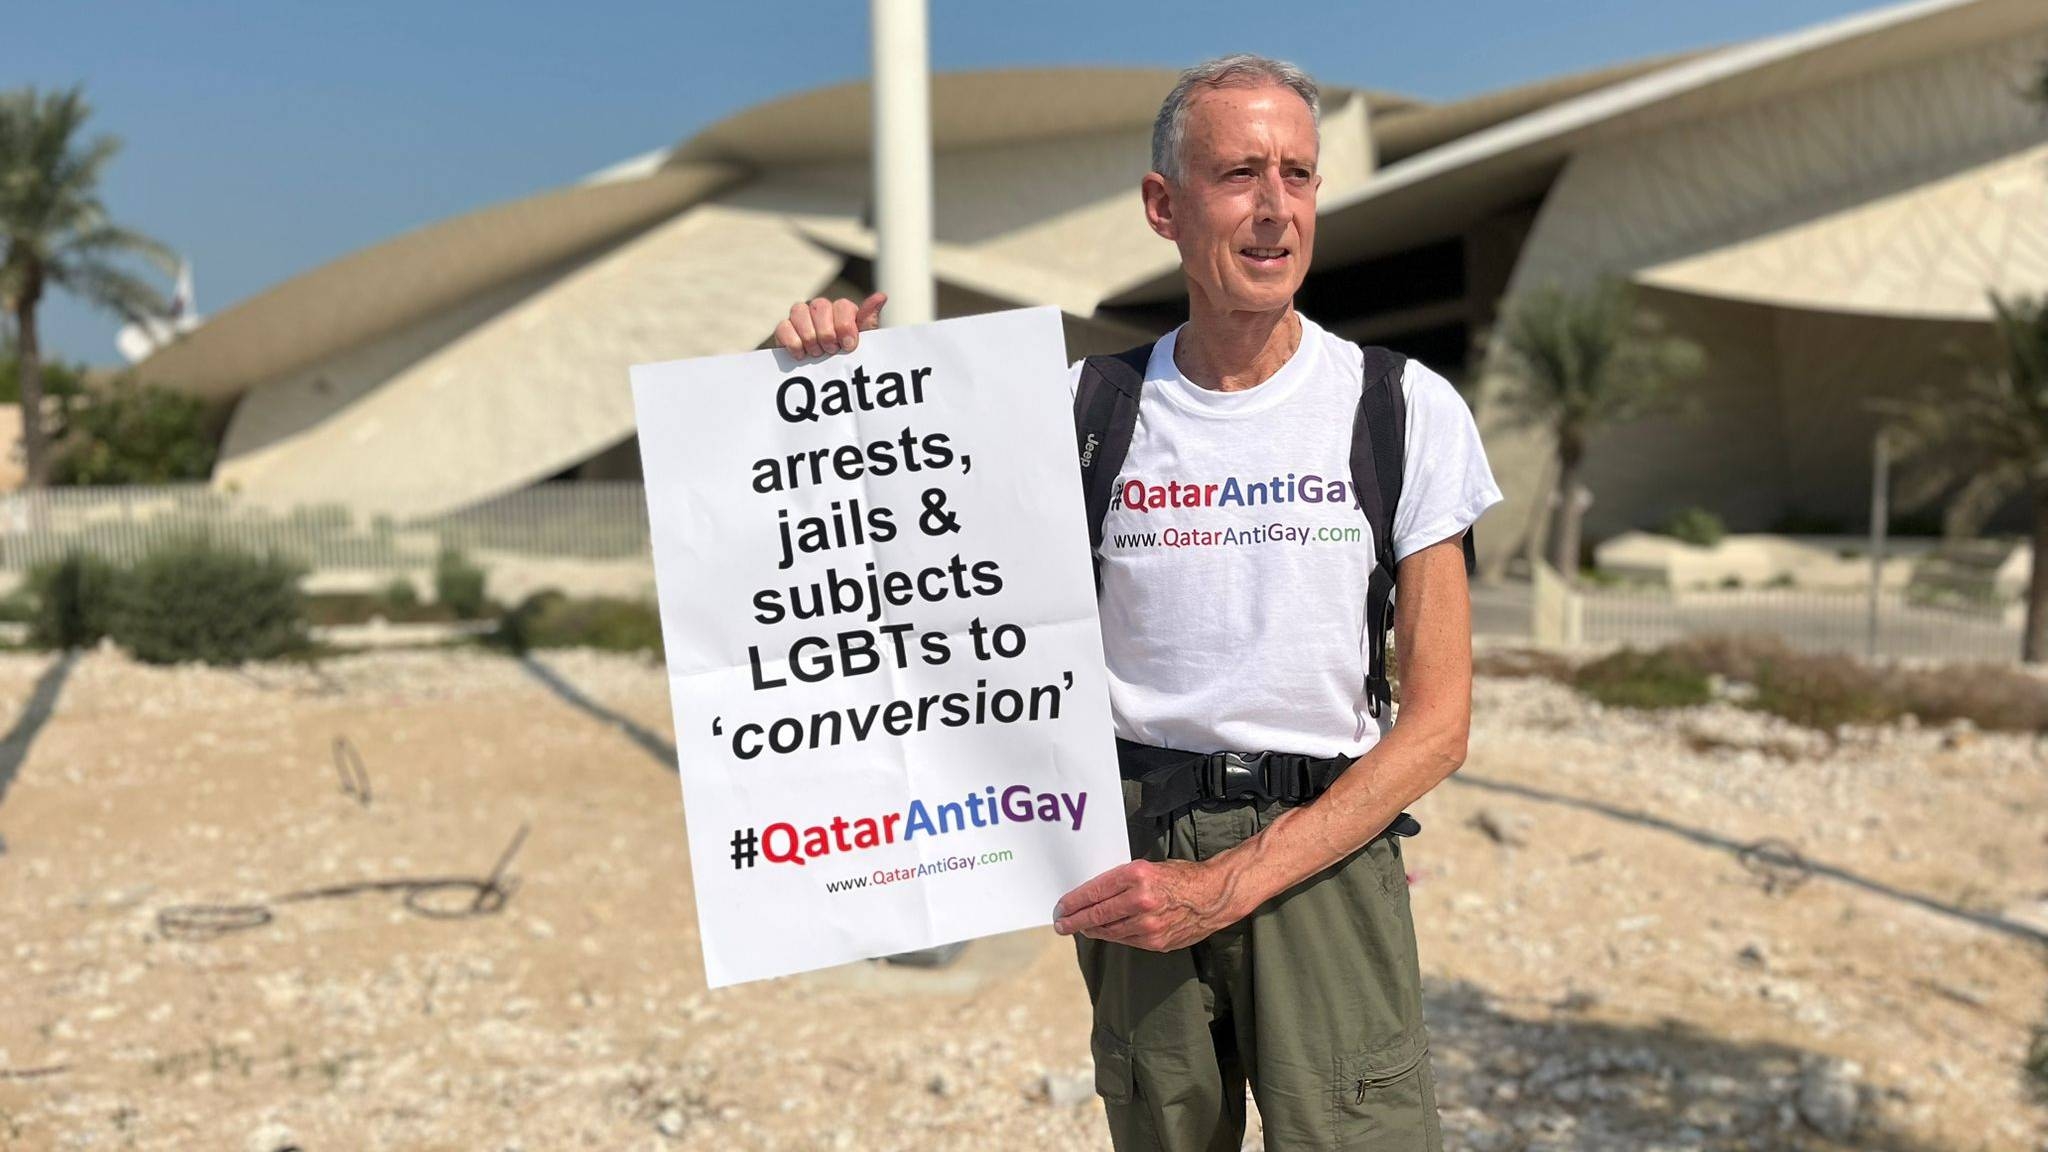 Peter Tatchell carrying a protest sign outside the National Museum of Qatar in Doha, 25 October 2022 (Twitter\Peter Tatchell)